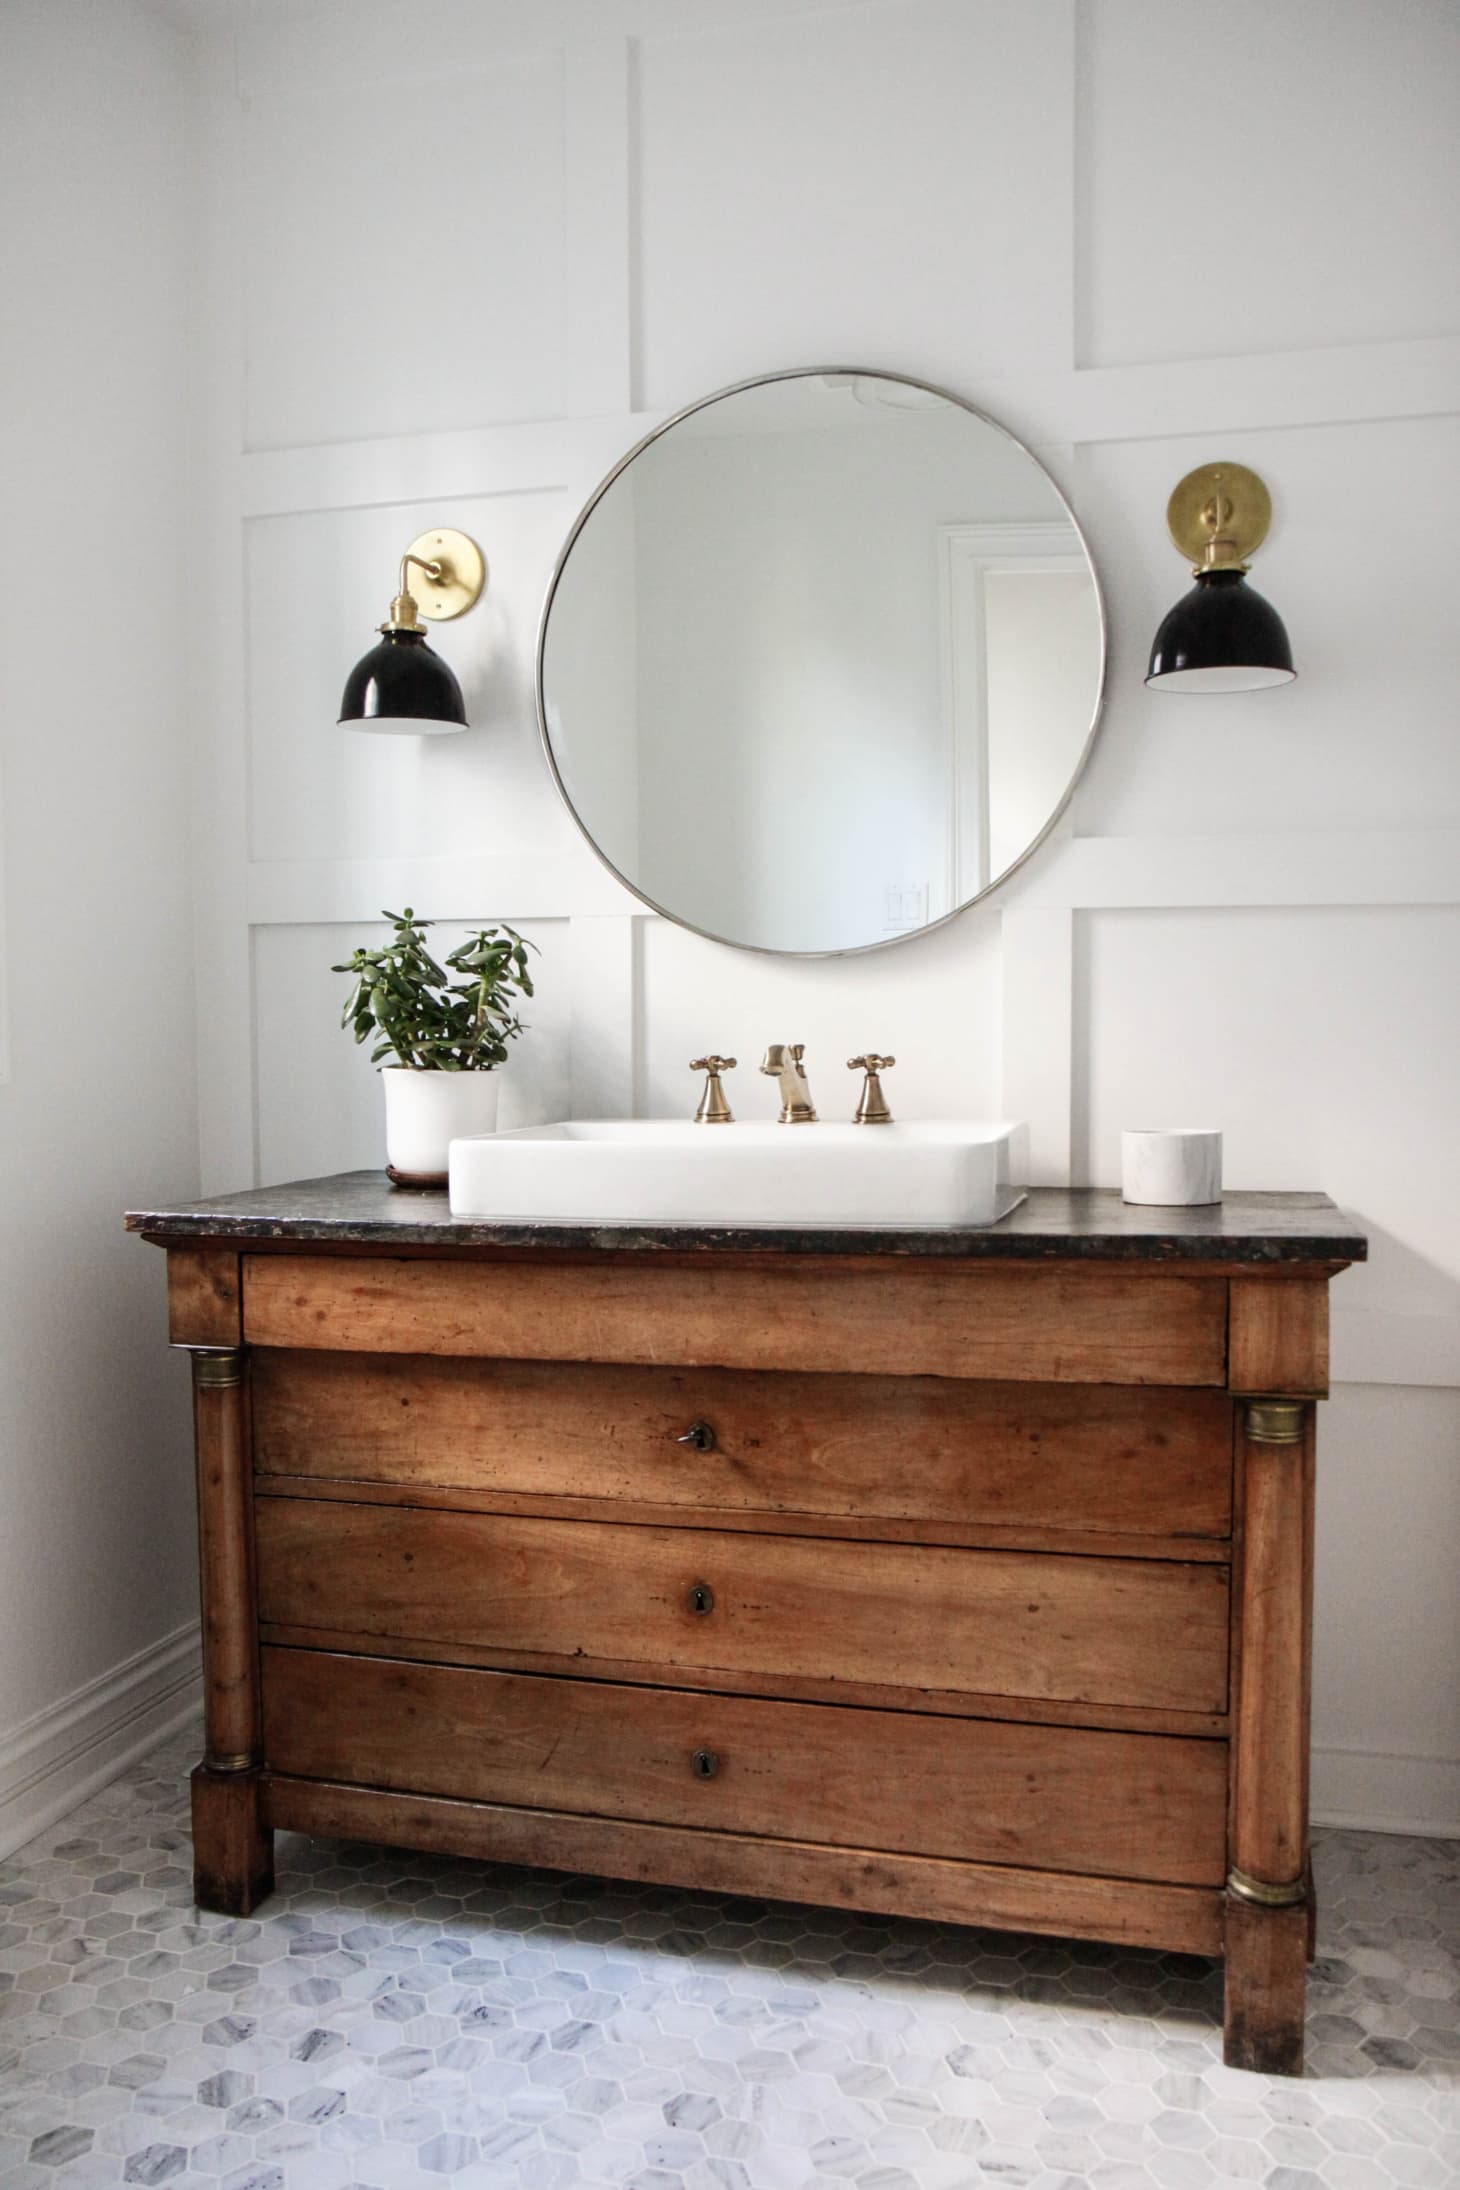 Bathroom Sink Consoles Made From Vintage Dressers Photos Ideas